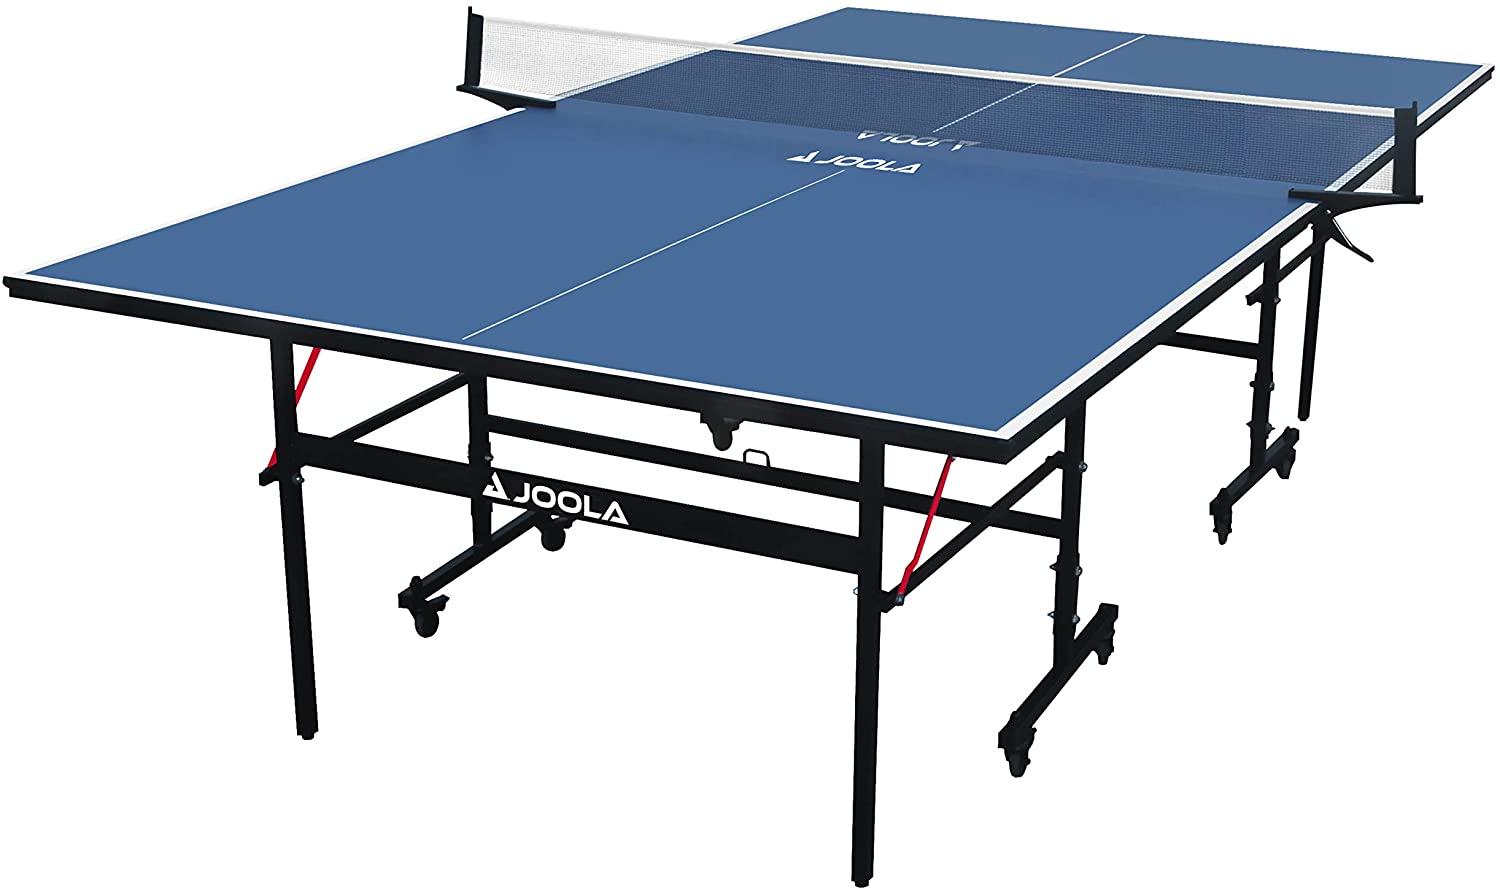 Joola Inside Table Tennis Table for $223.72 Shipped